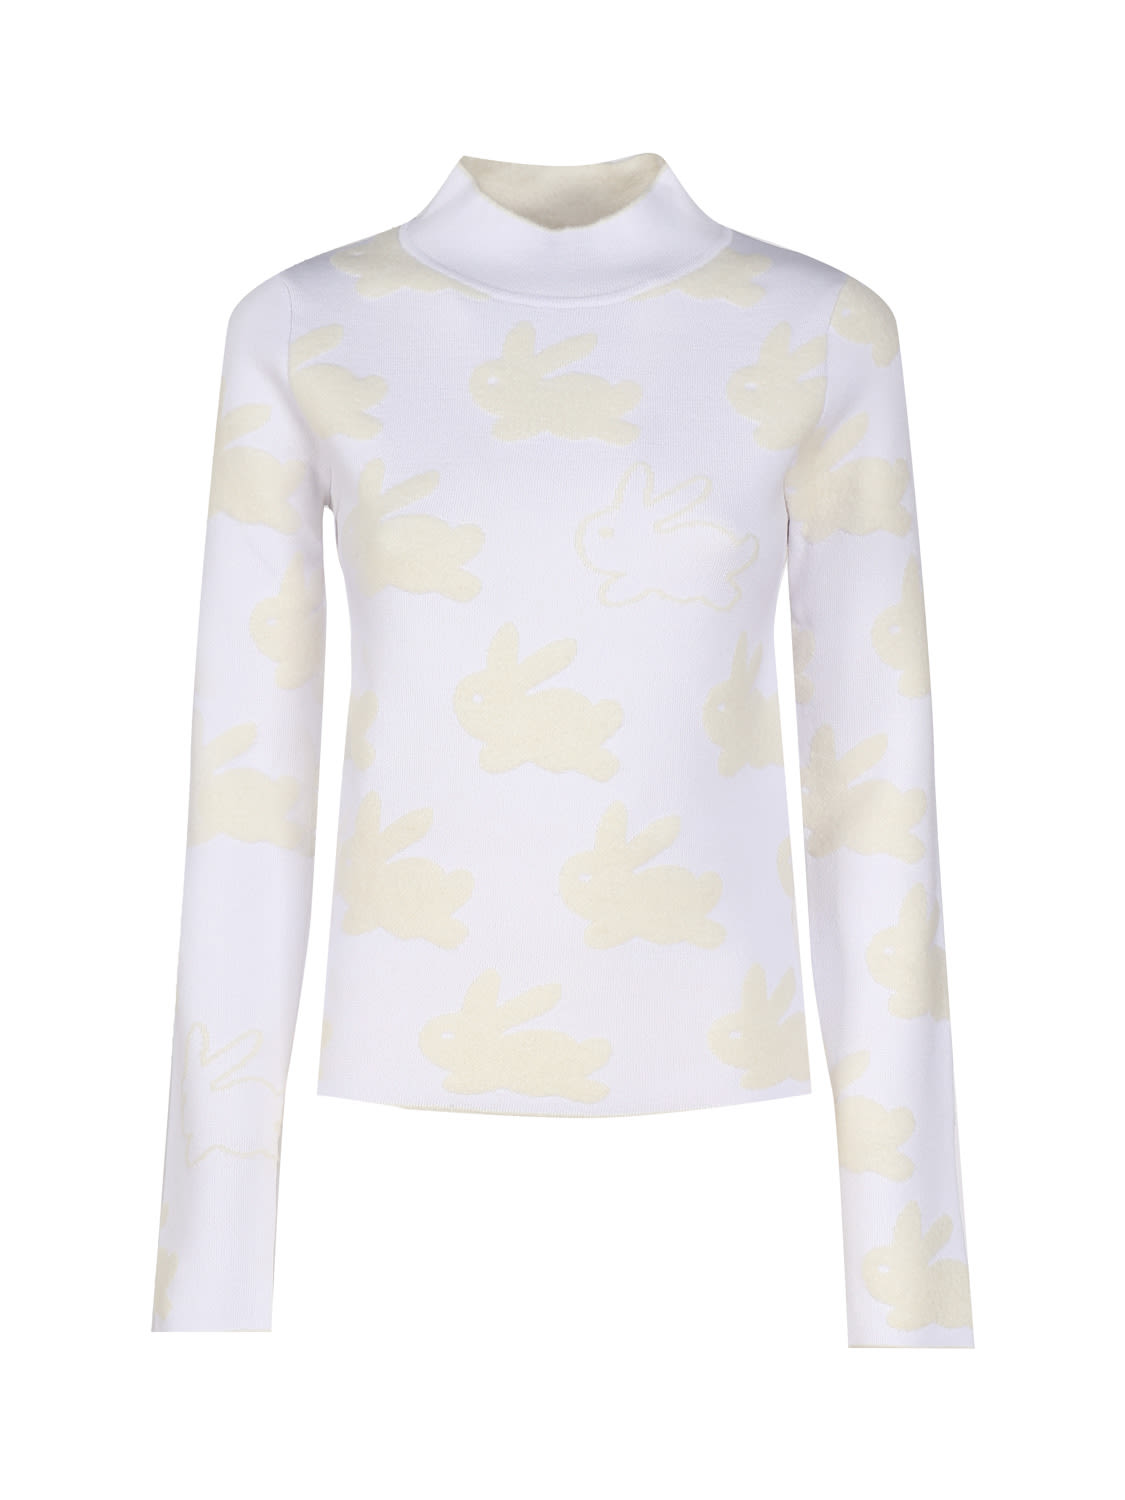 JW ANDERSON TURTLENECK SWEATER WITH ALL-OVER RABBIT MOTIF